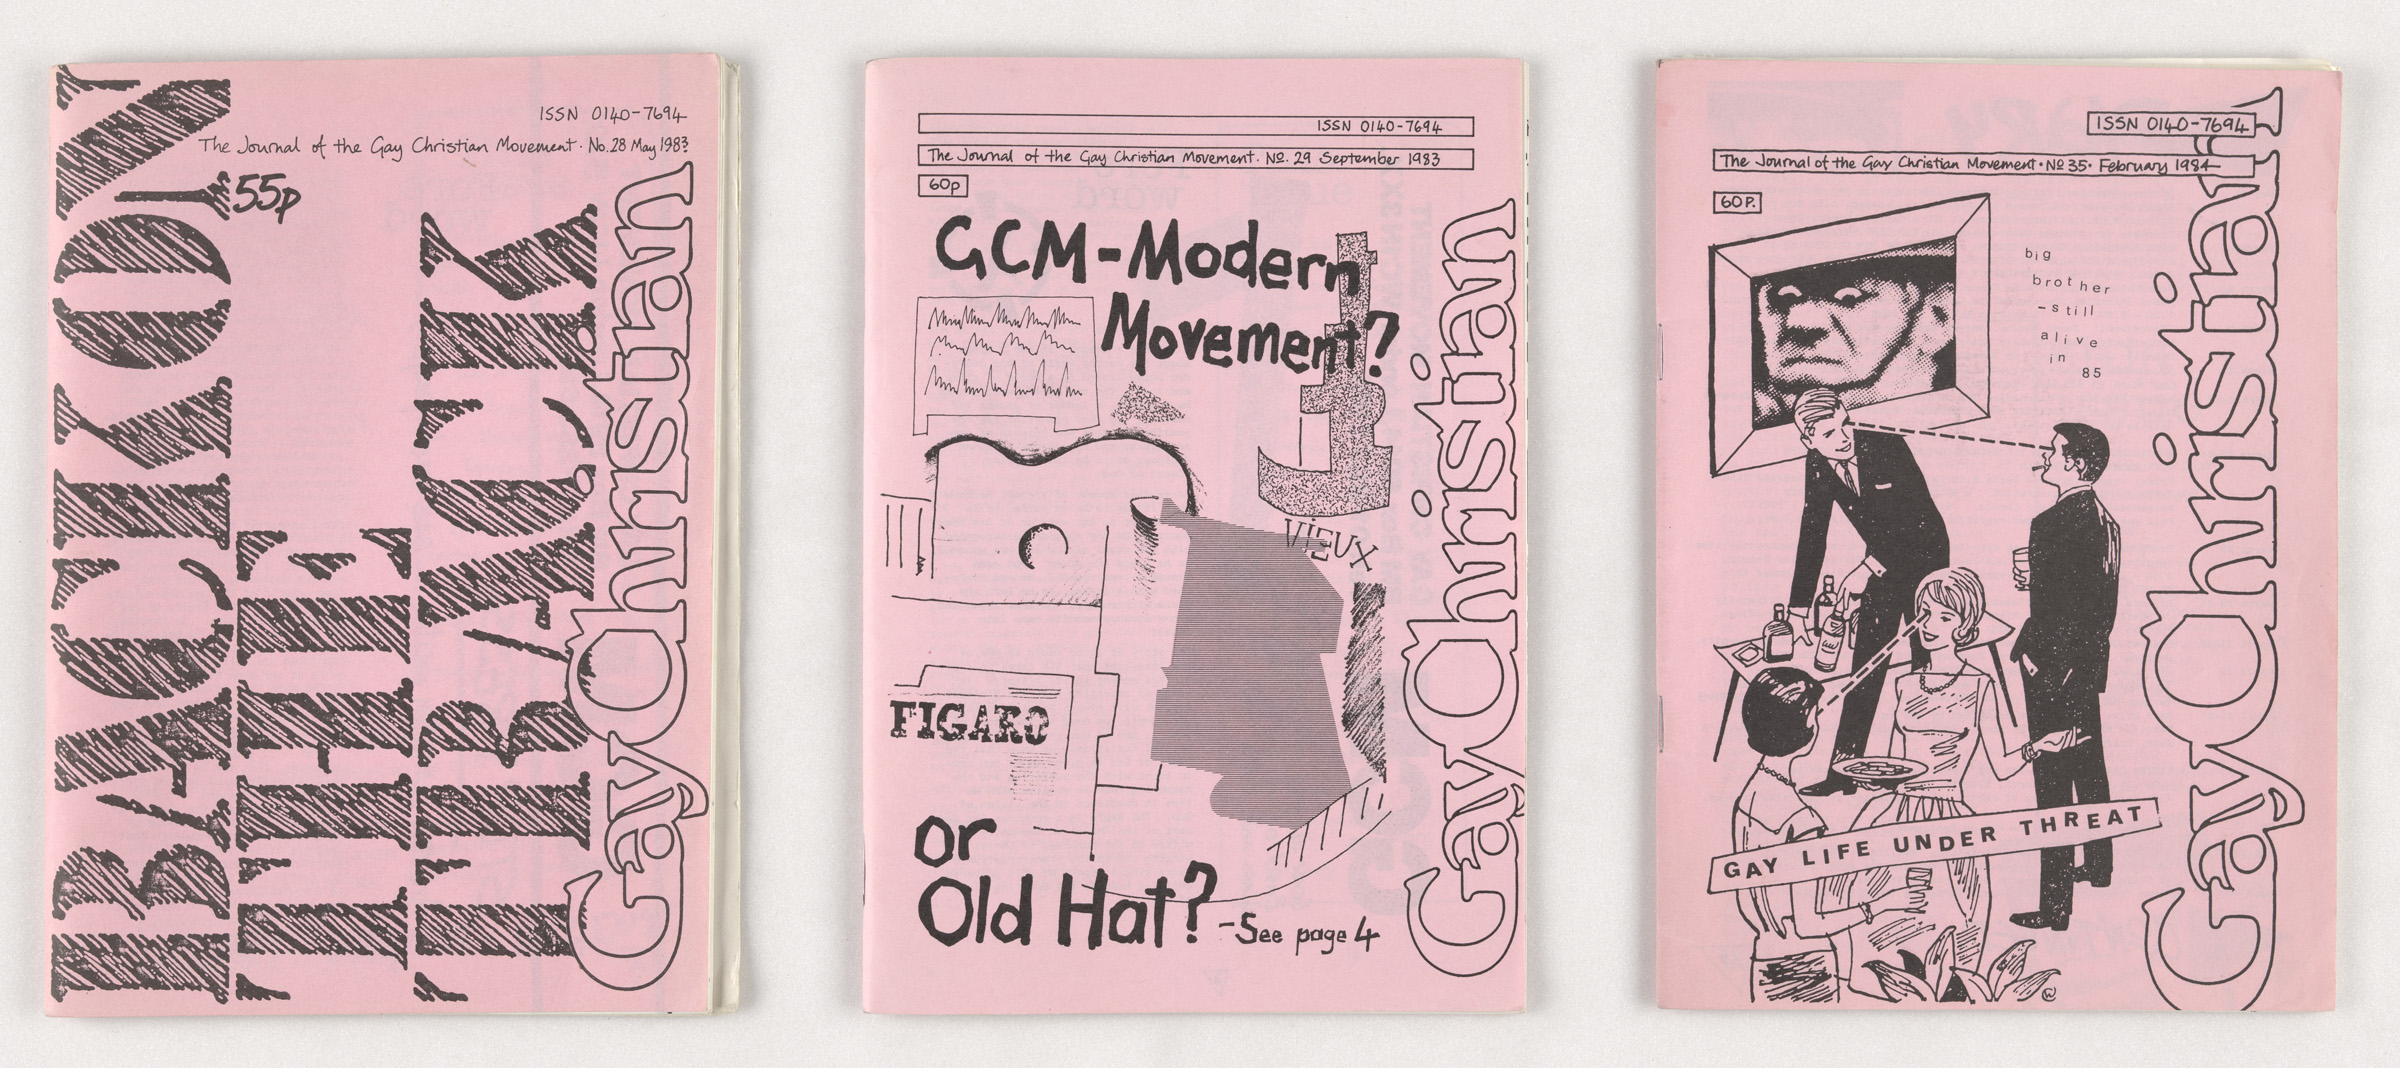 A photograph of 3 issues of Gay Christian zine, each photocopied on to pink paper.